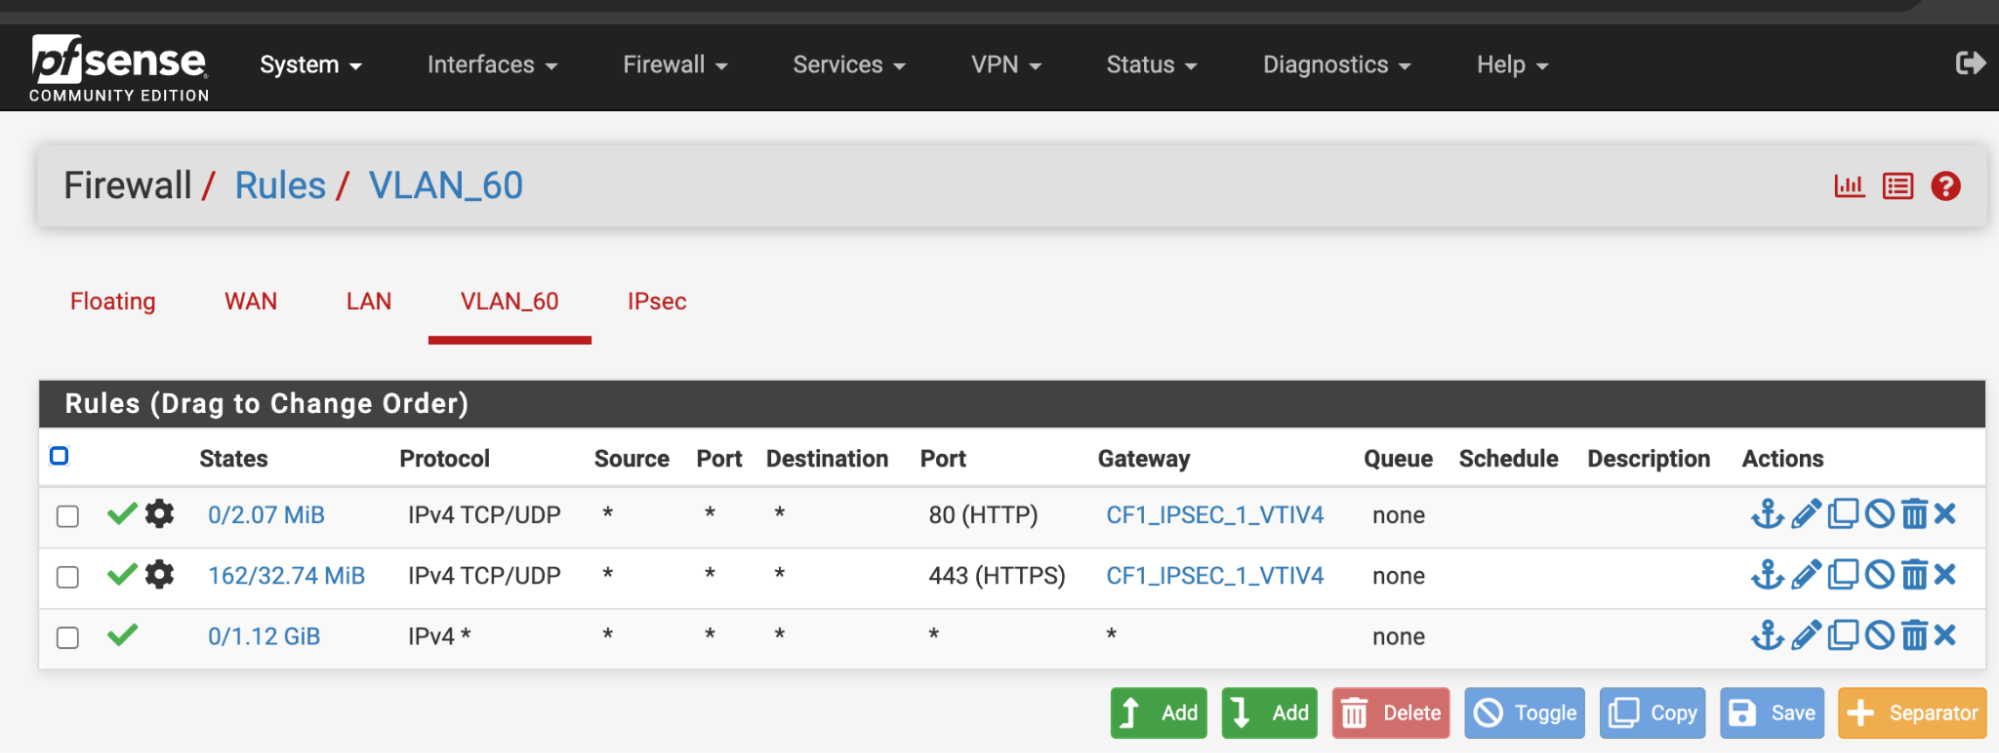 Change the gateway in the firewall rules for LAN traffic